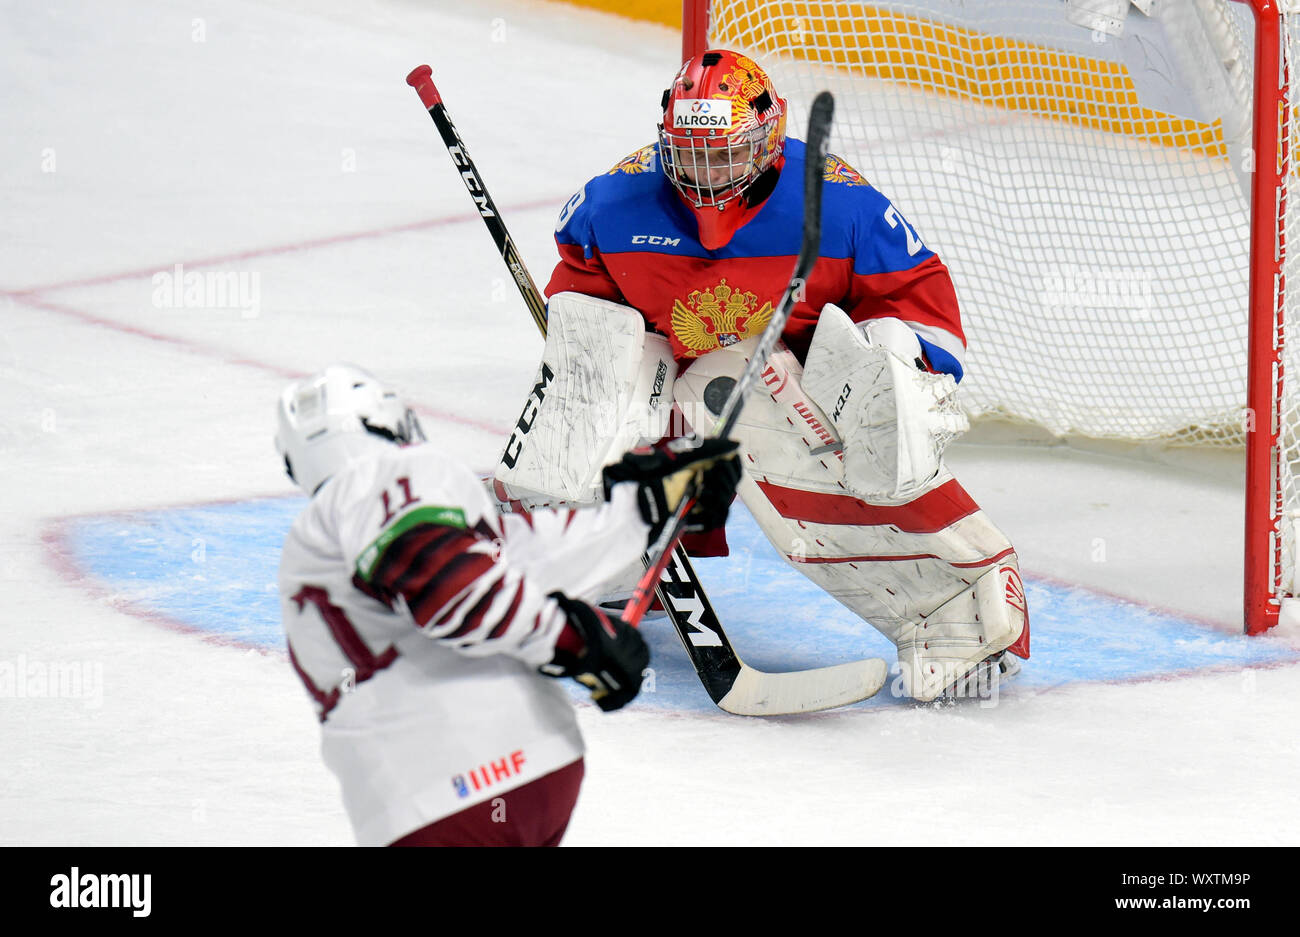 Latvia, Latvia. 17th Sep, 2019. Goalkeeper Yegor Guskov of Russia try to make save during the exhibition match between U-18 national ice hockey teams of Latvia and Russia in Riga, Latvia, Sept. 17, 2019. Credit: Edijs Palens/Xinhua Stock Photo